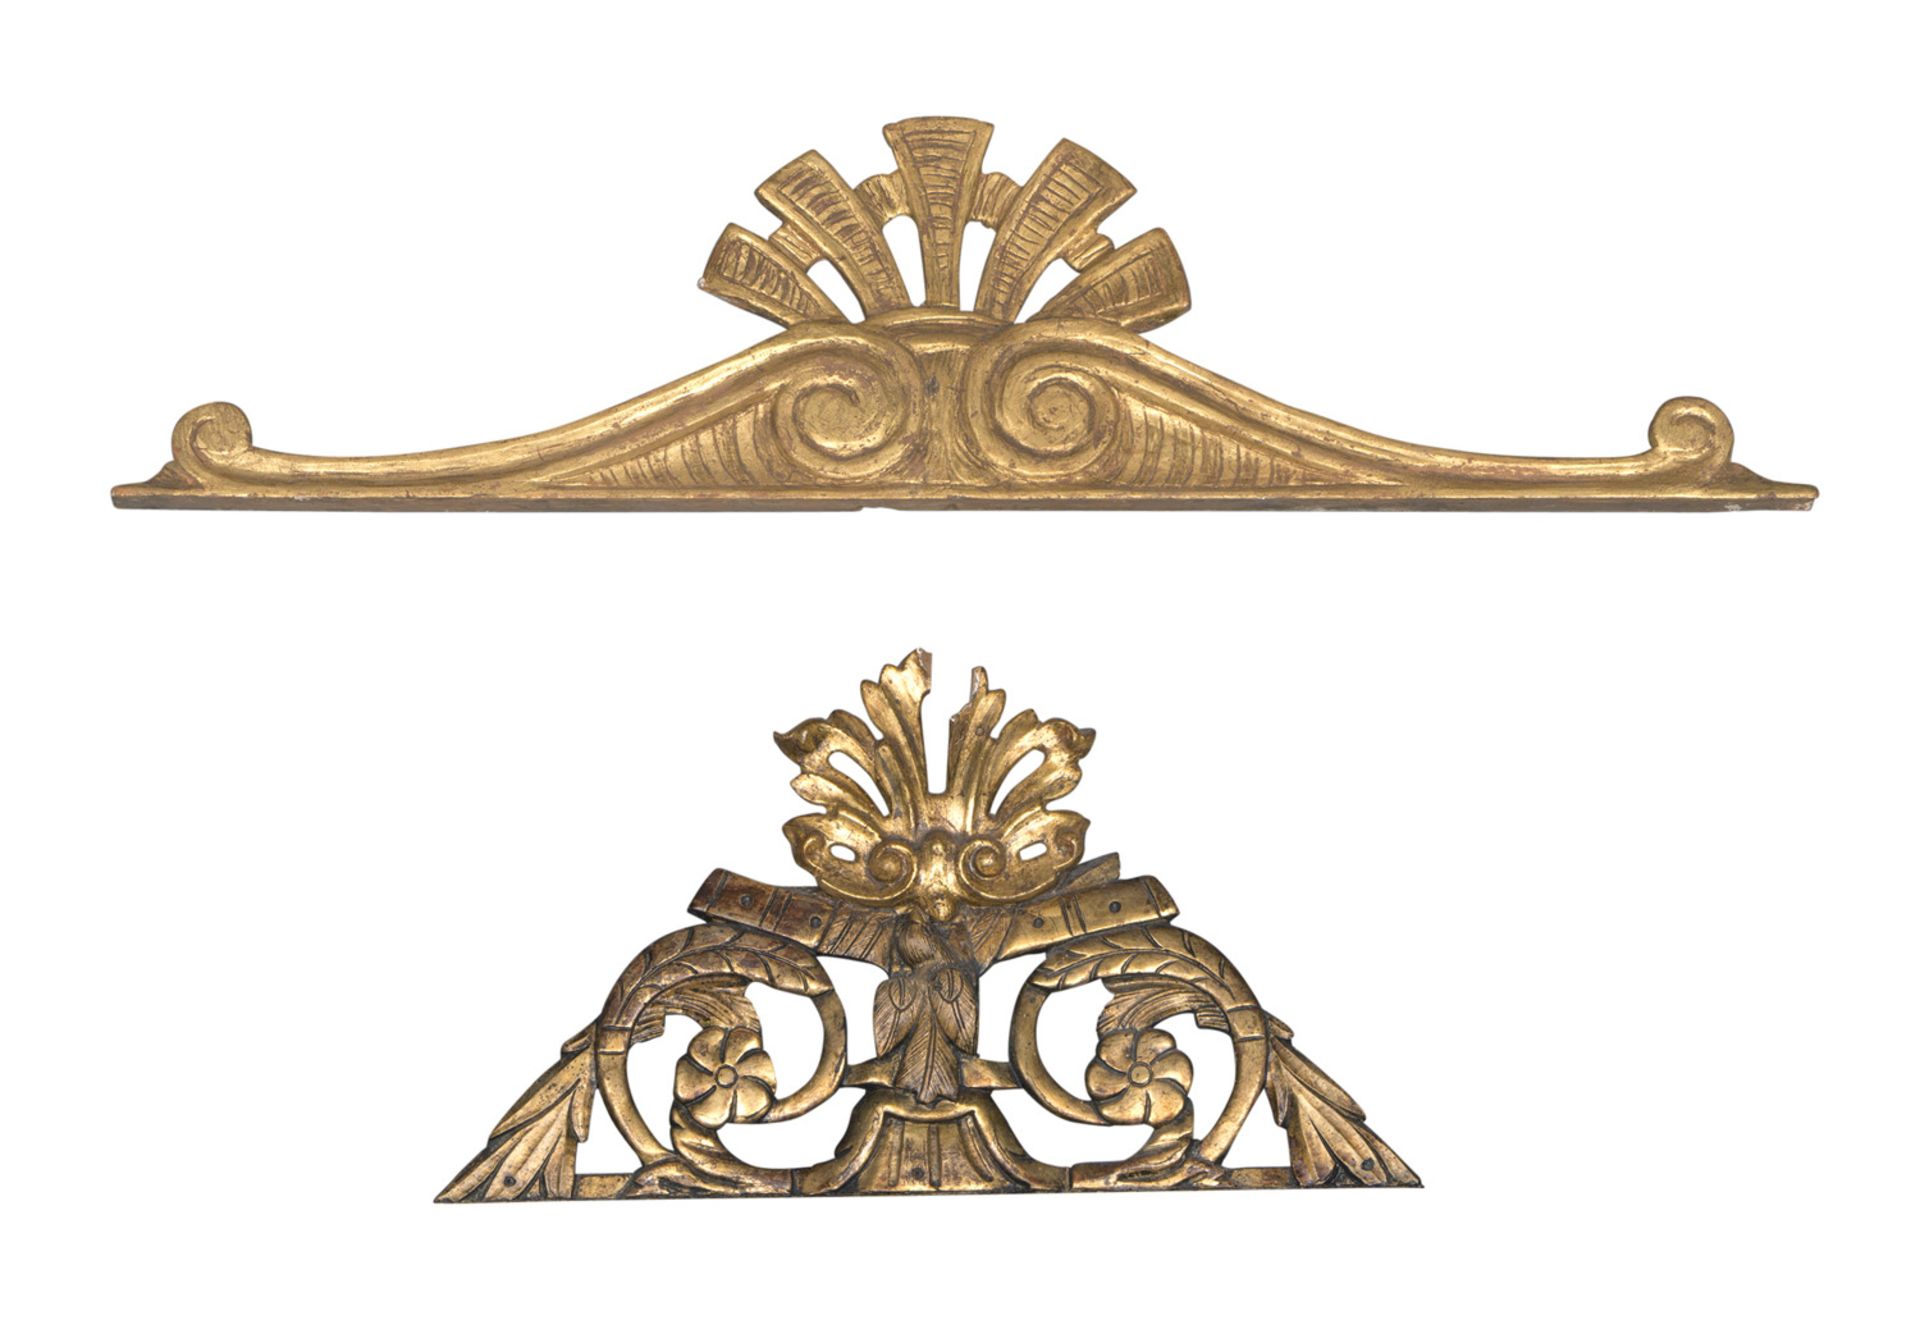 TWO SMALL FRIEZES IN GILTWOOD, ANTIQUE ELEMENTS carved to roccailles and floral motifs. Measures cm.